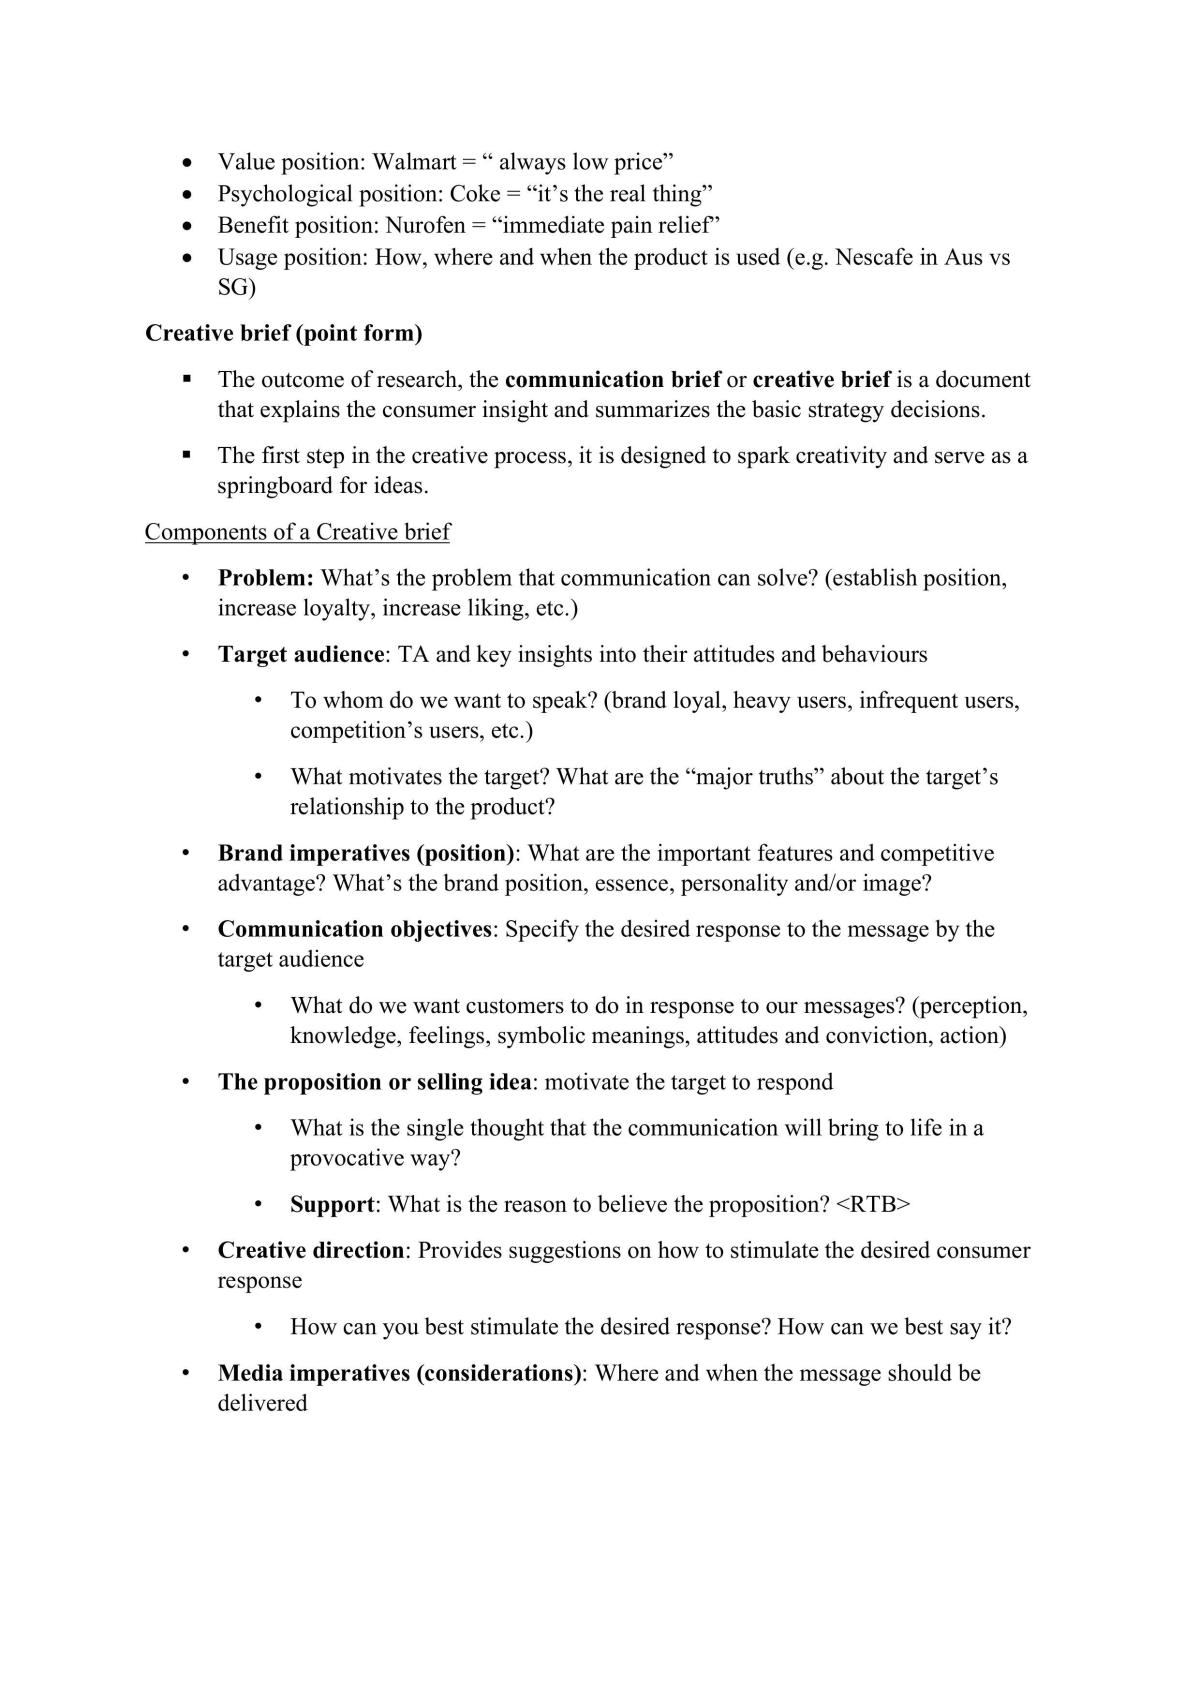 MKT358 Integrated Marketing Communications Study Notes - Page 28